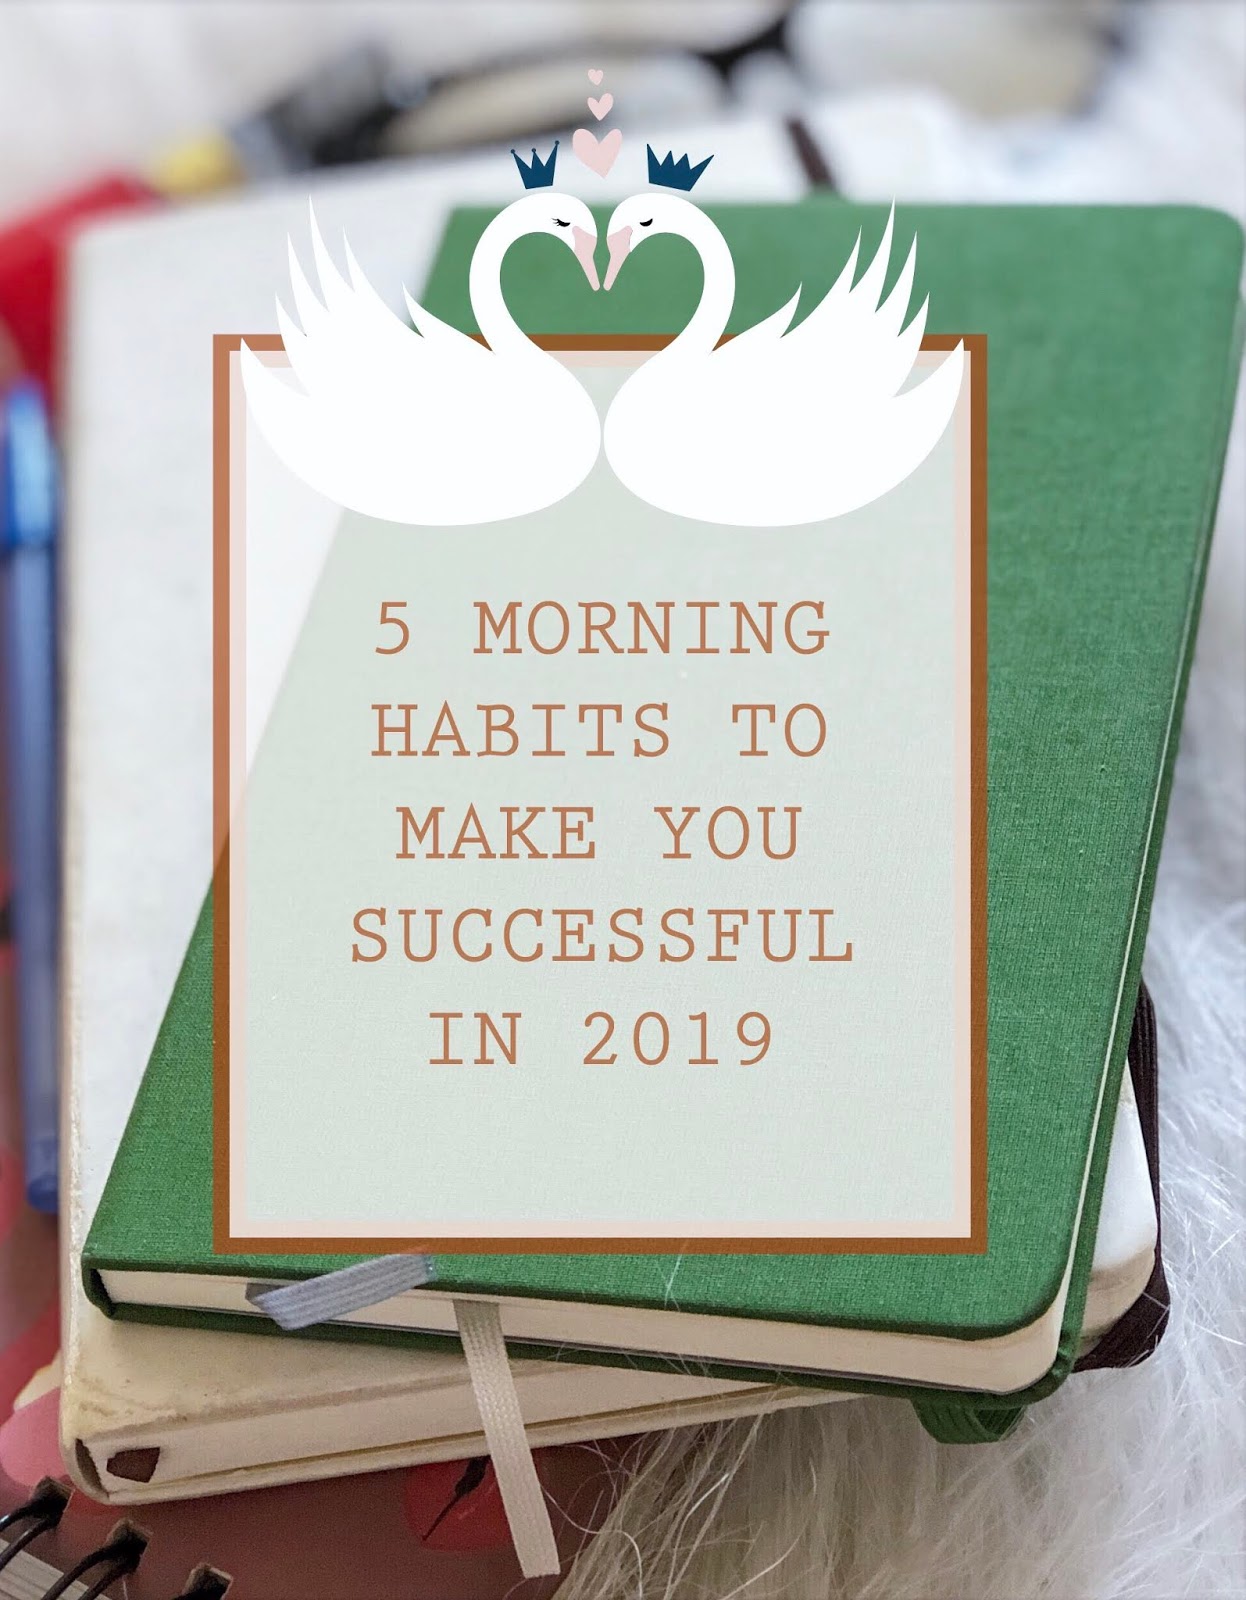 5 MORNING HABITS TO MAKE YOU SUCCESSFUL IN 2019